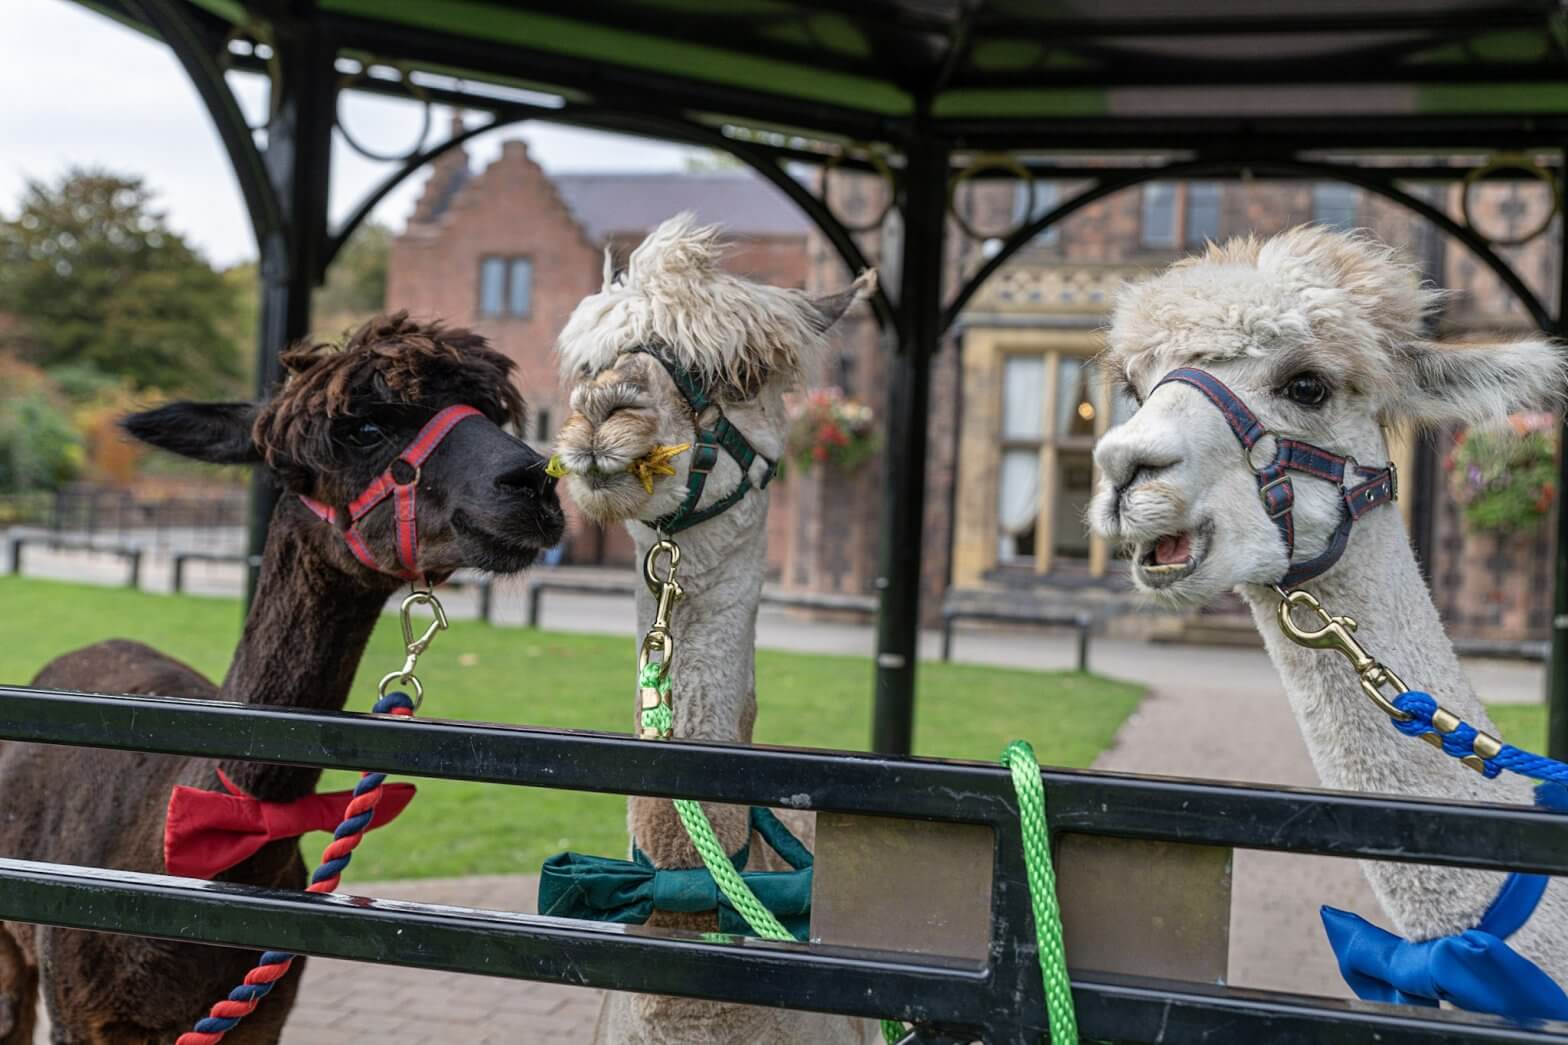 Our three alpacas are ready for to attend a wedding at Walton Hall and Gardens. Plan your visit to Walton Hall and Gardens today.